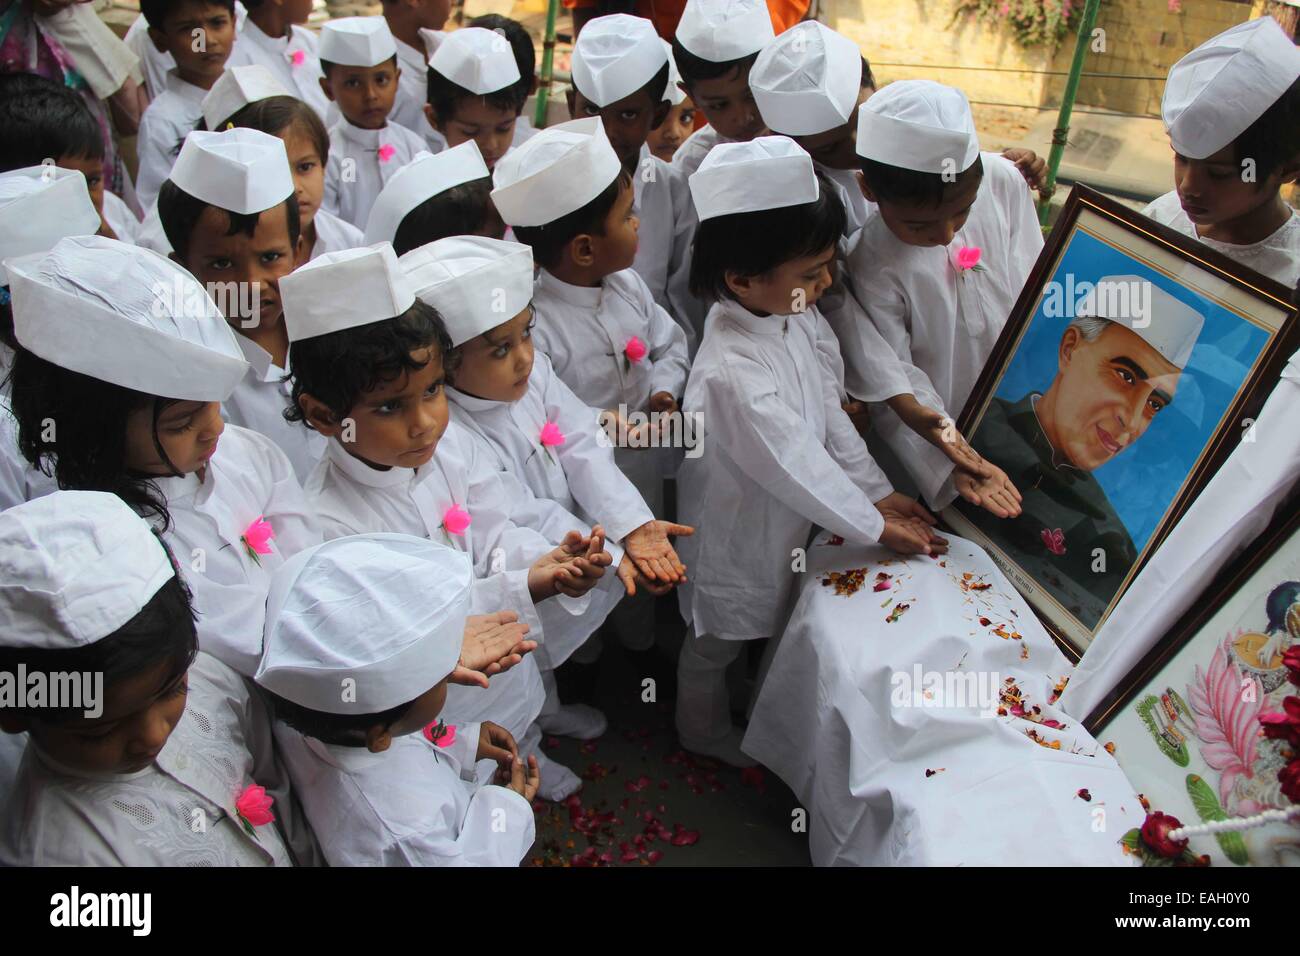 Children dressed up Chacha Nehru and pay floral tribute on the portrait of former Prime Minister Jawaharlal Nehru on the eve of his 125th birth anniversary at Allahabad. © Amar Deep/Pacific Press/Alamy Live News Stock Photo